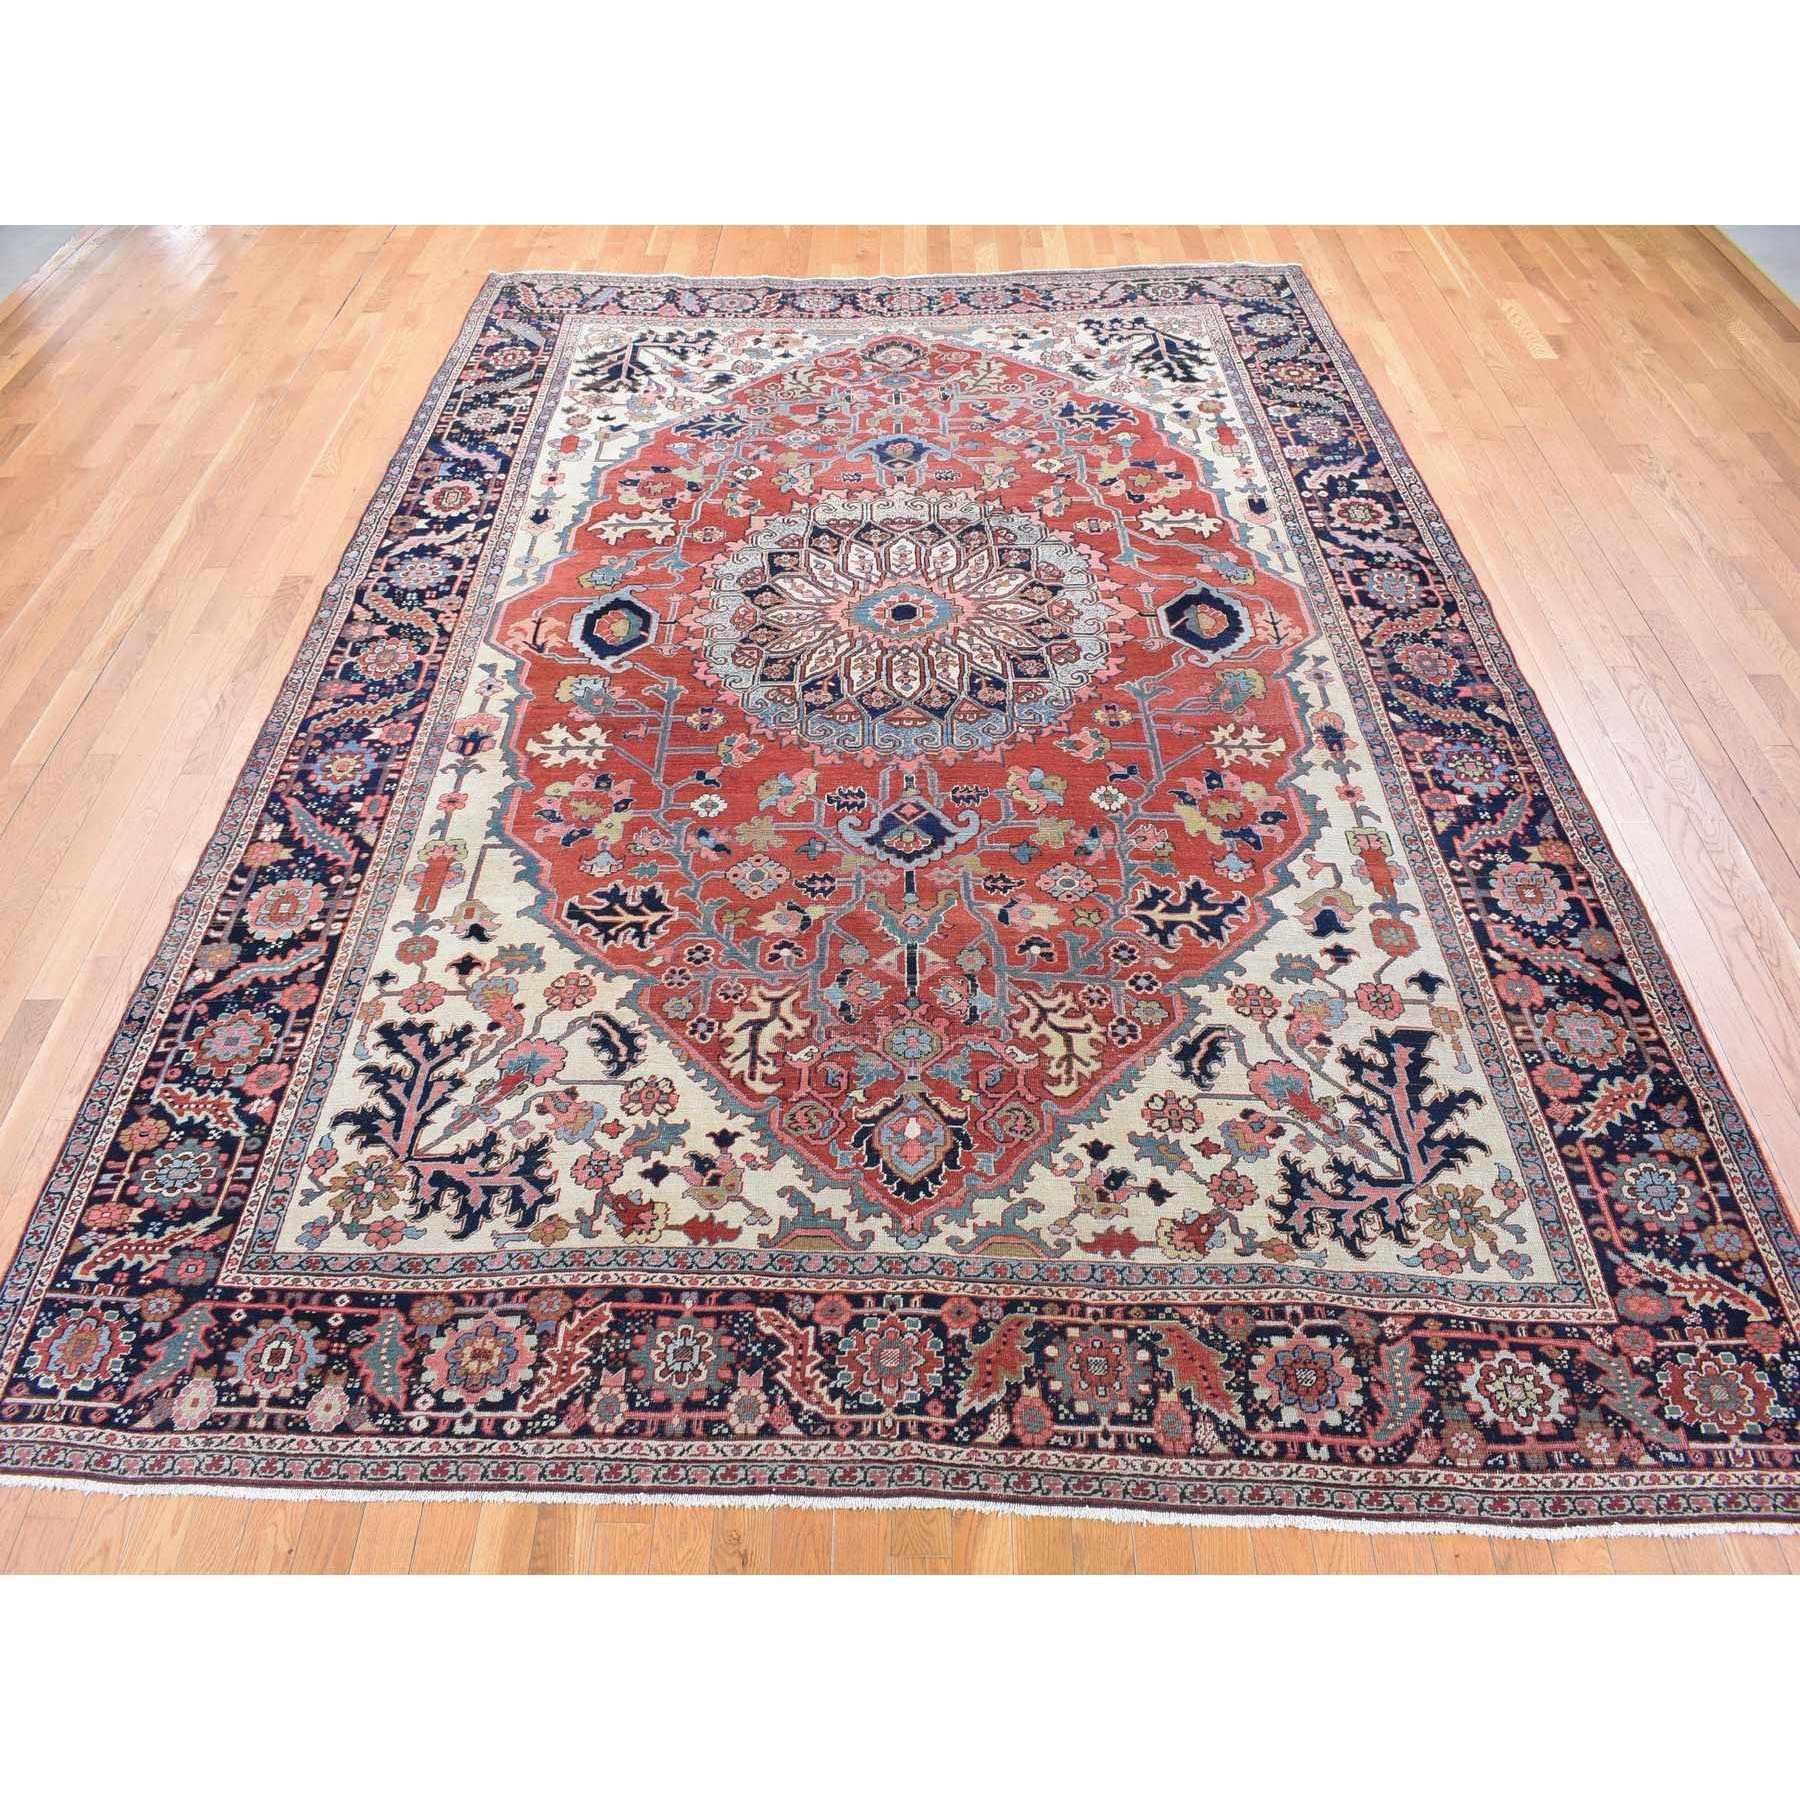 Medieval Brick Red Antique Persian Serapi Heriz Clean Hand Knotted Pure Wool Oriental Rug